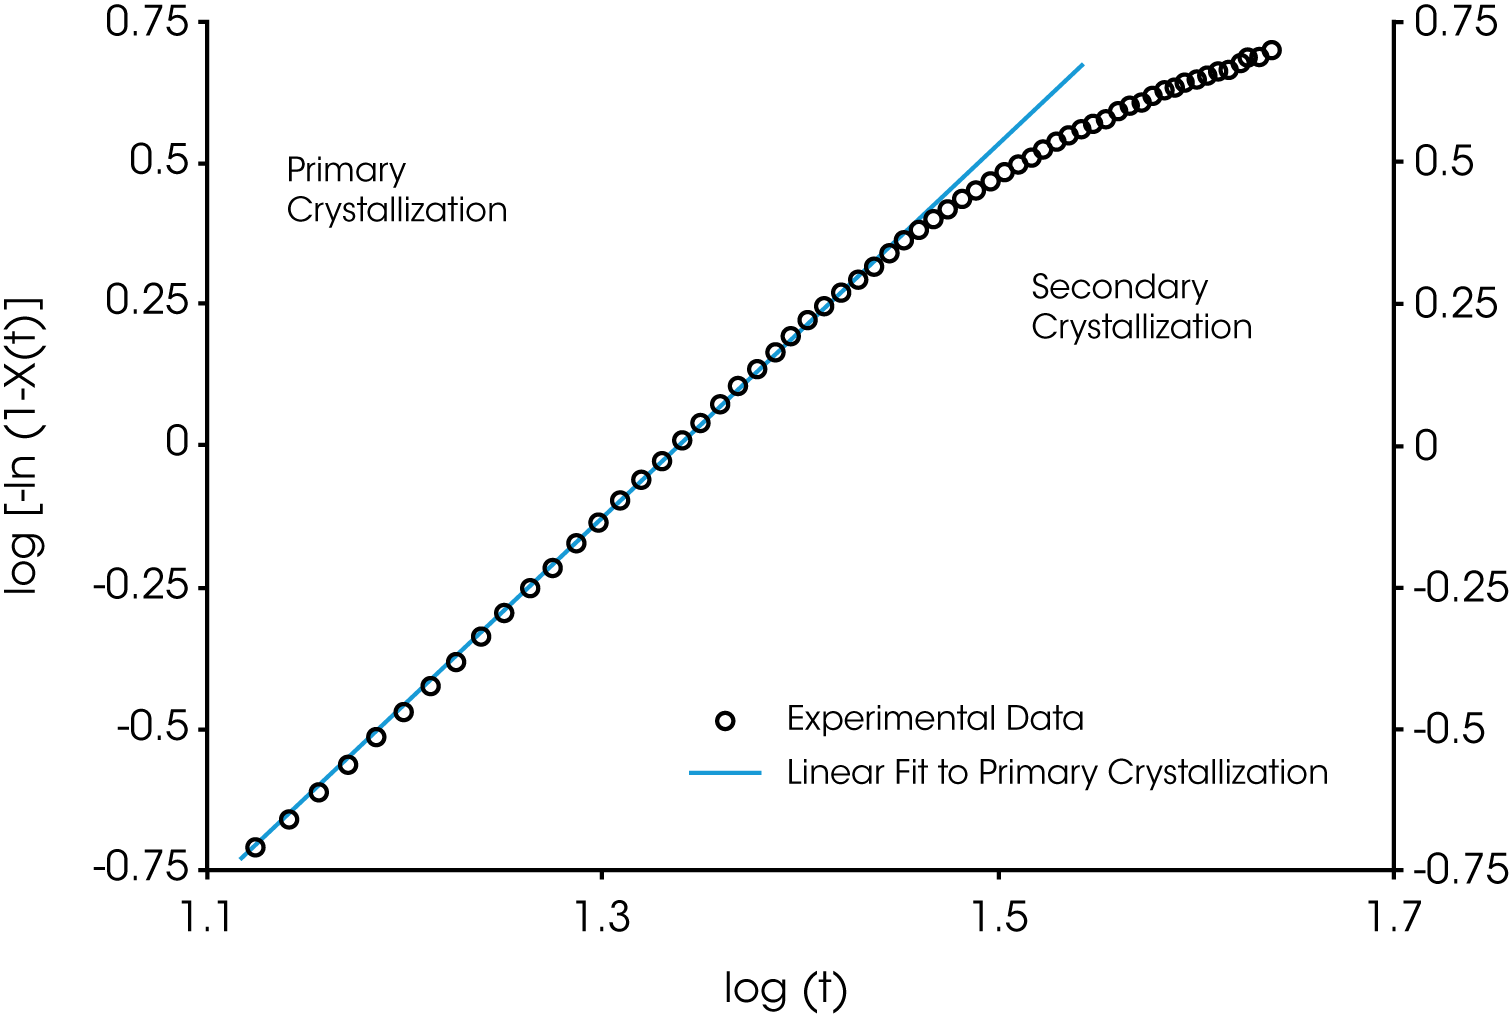 Figure 12. Linearized Avrami Fit - deviation due to secondary crystallization processes [9]. Sample is PP with Millad 3988, TC = 145 °C